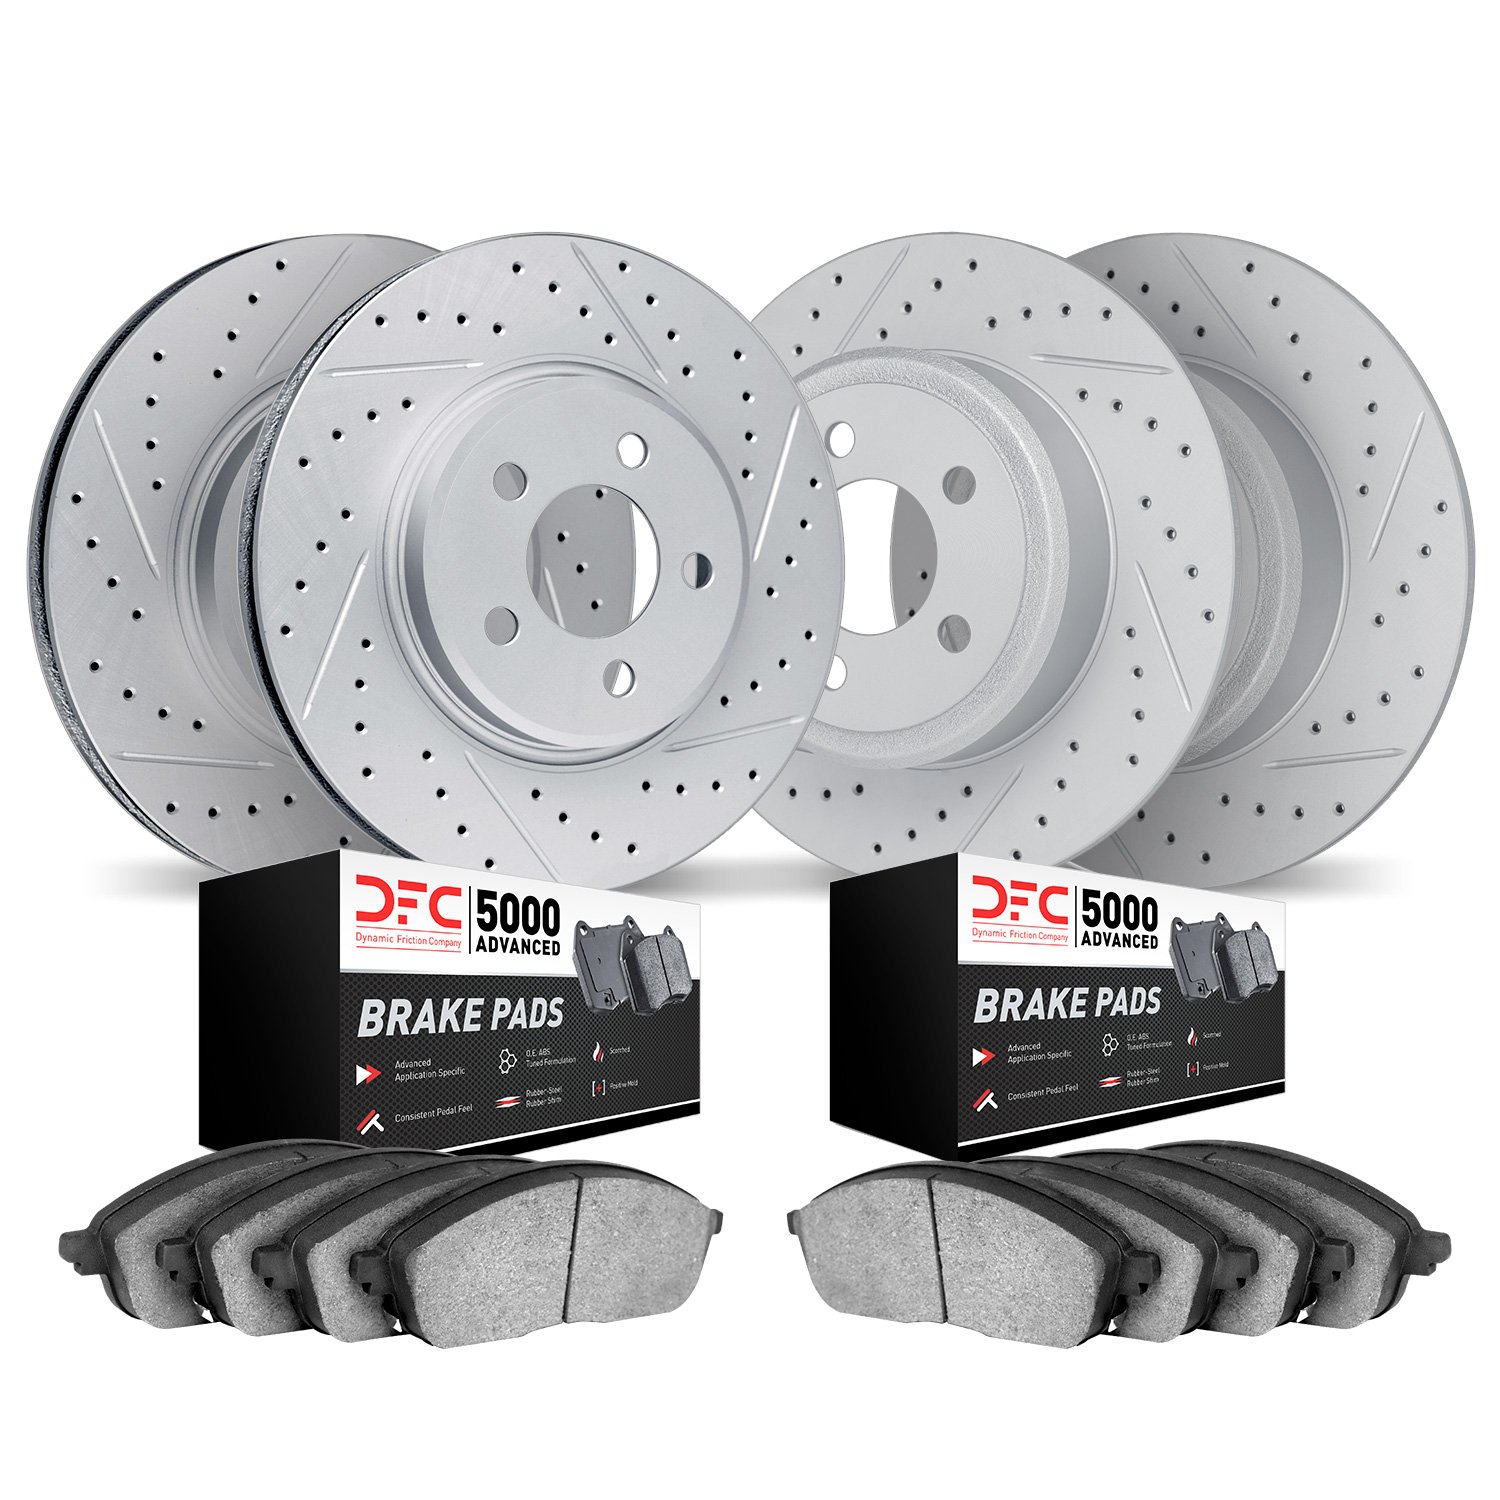 2504-42071 Geoperformance Drilled/Slotted Rotors w/5000 Advanced Brake Pads Kit, 1999-2002 Mopar, Position: Front and Rear